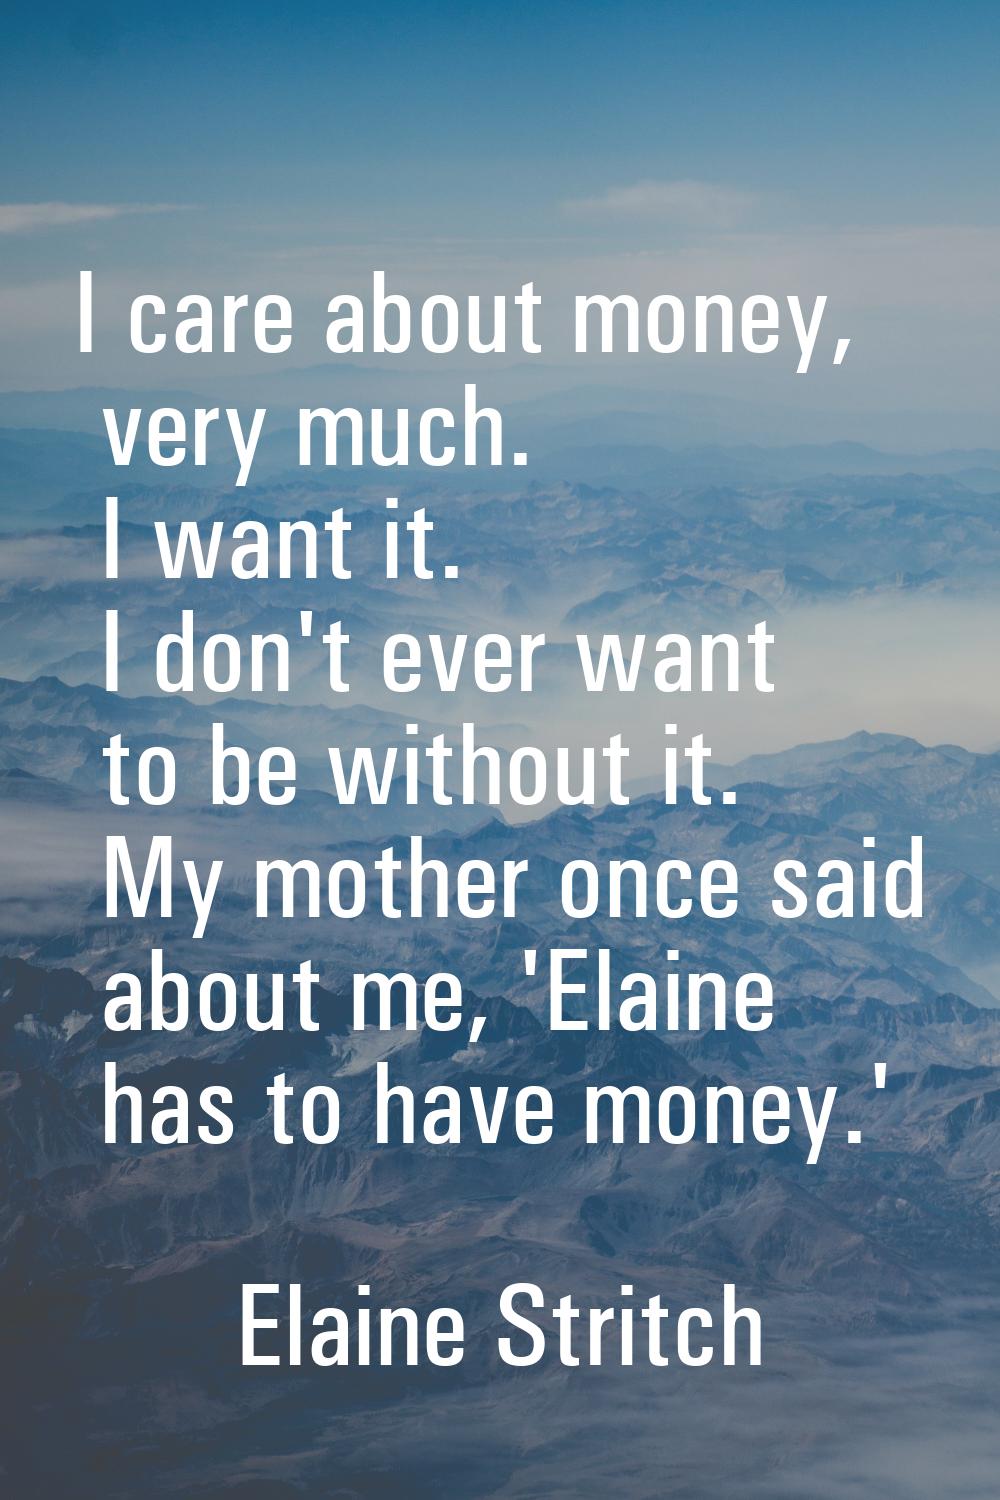 I care about money, very much. I want it. I don't ever want to be without it. My mother once said a